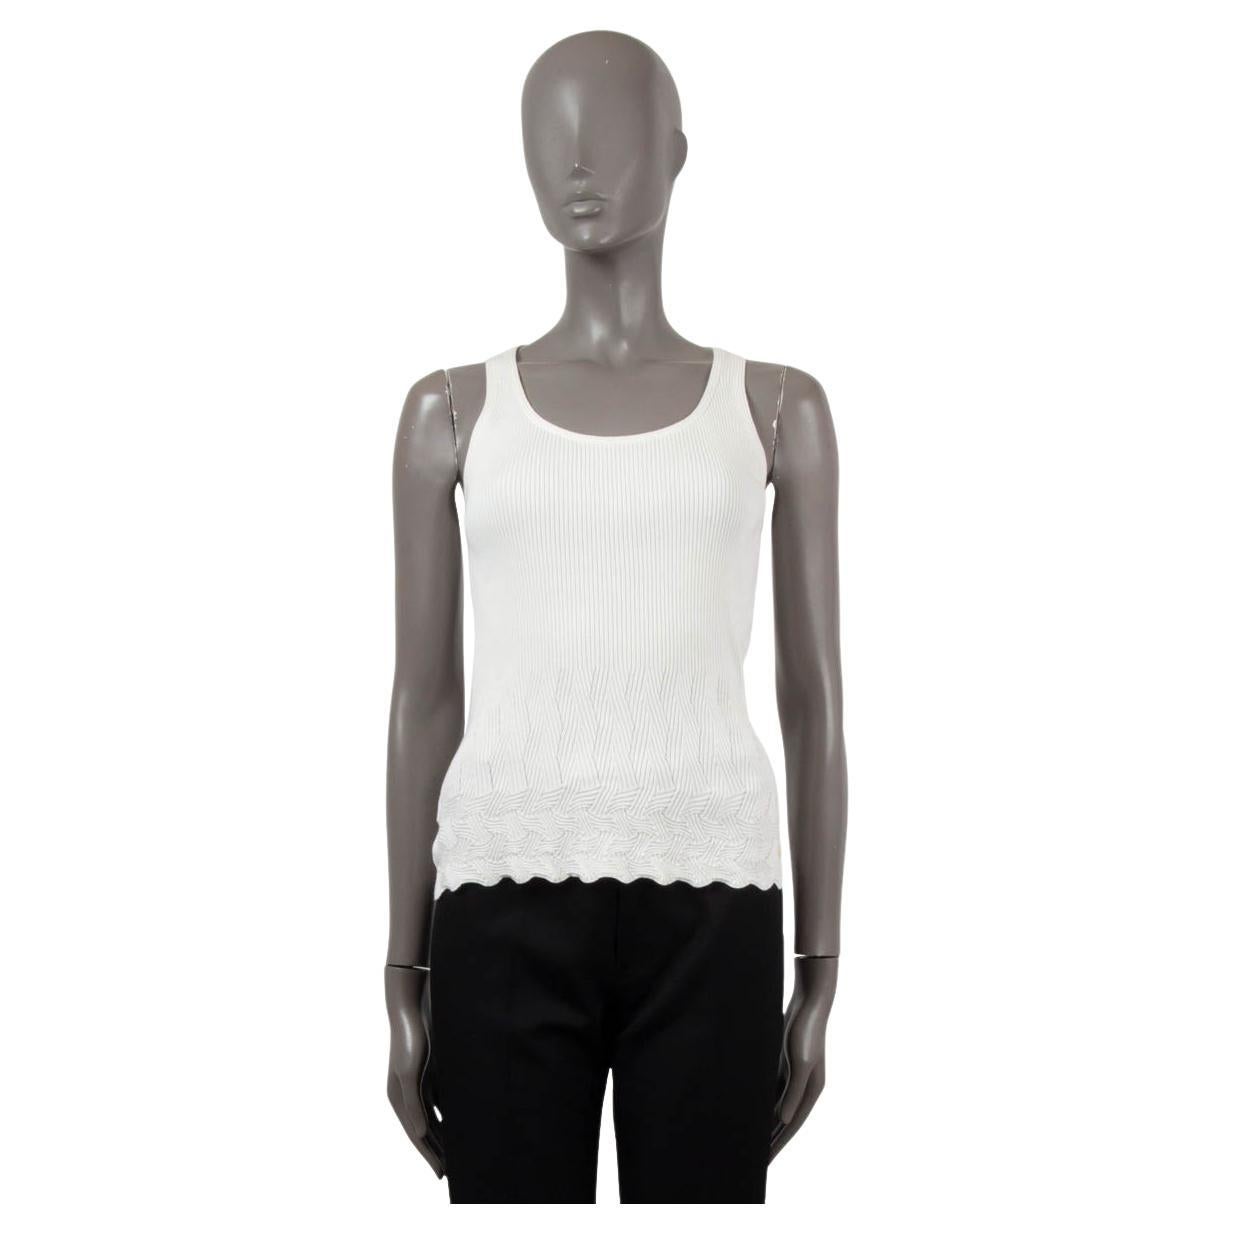 Chanel White Tank Top - 14 For Sale on 1stDibs  chanel tank top black and  white, chanel tank top white, chanel black and white tank top